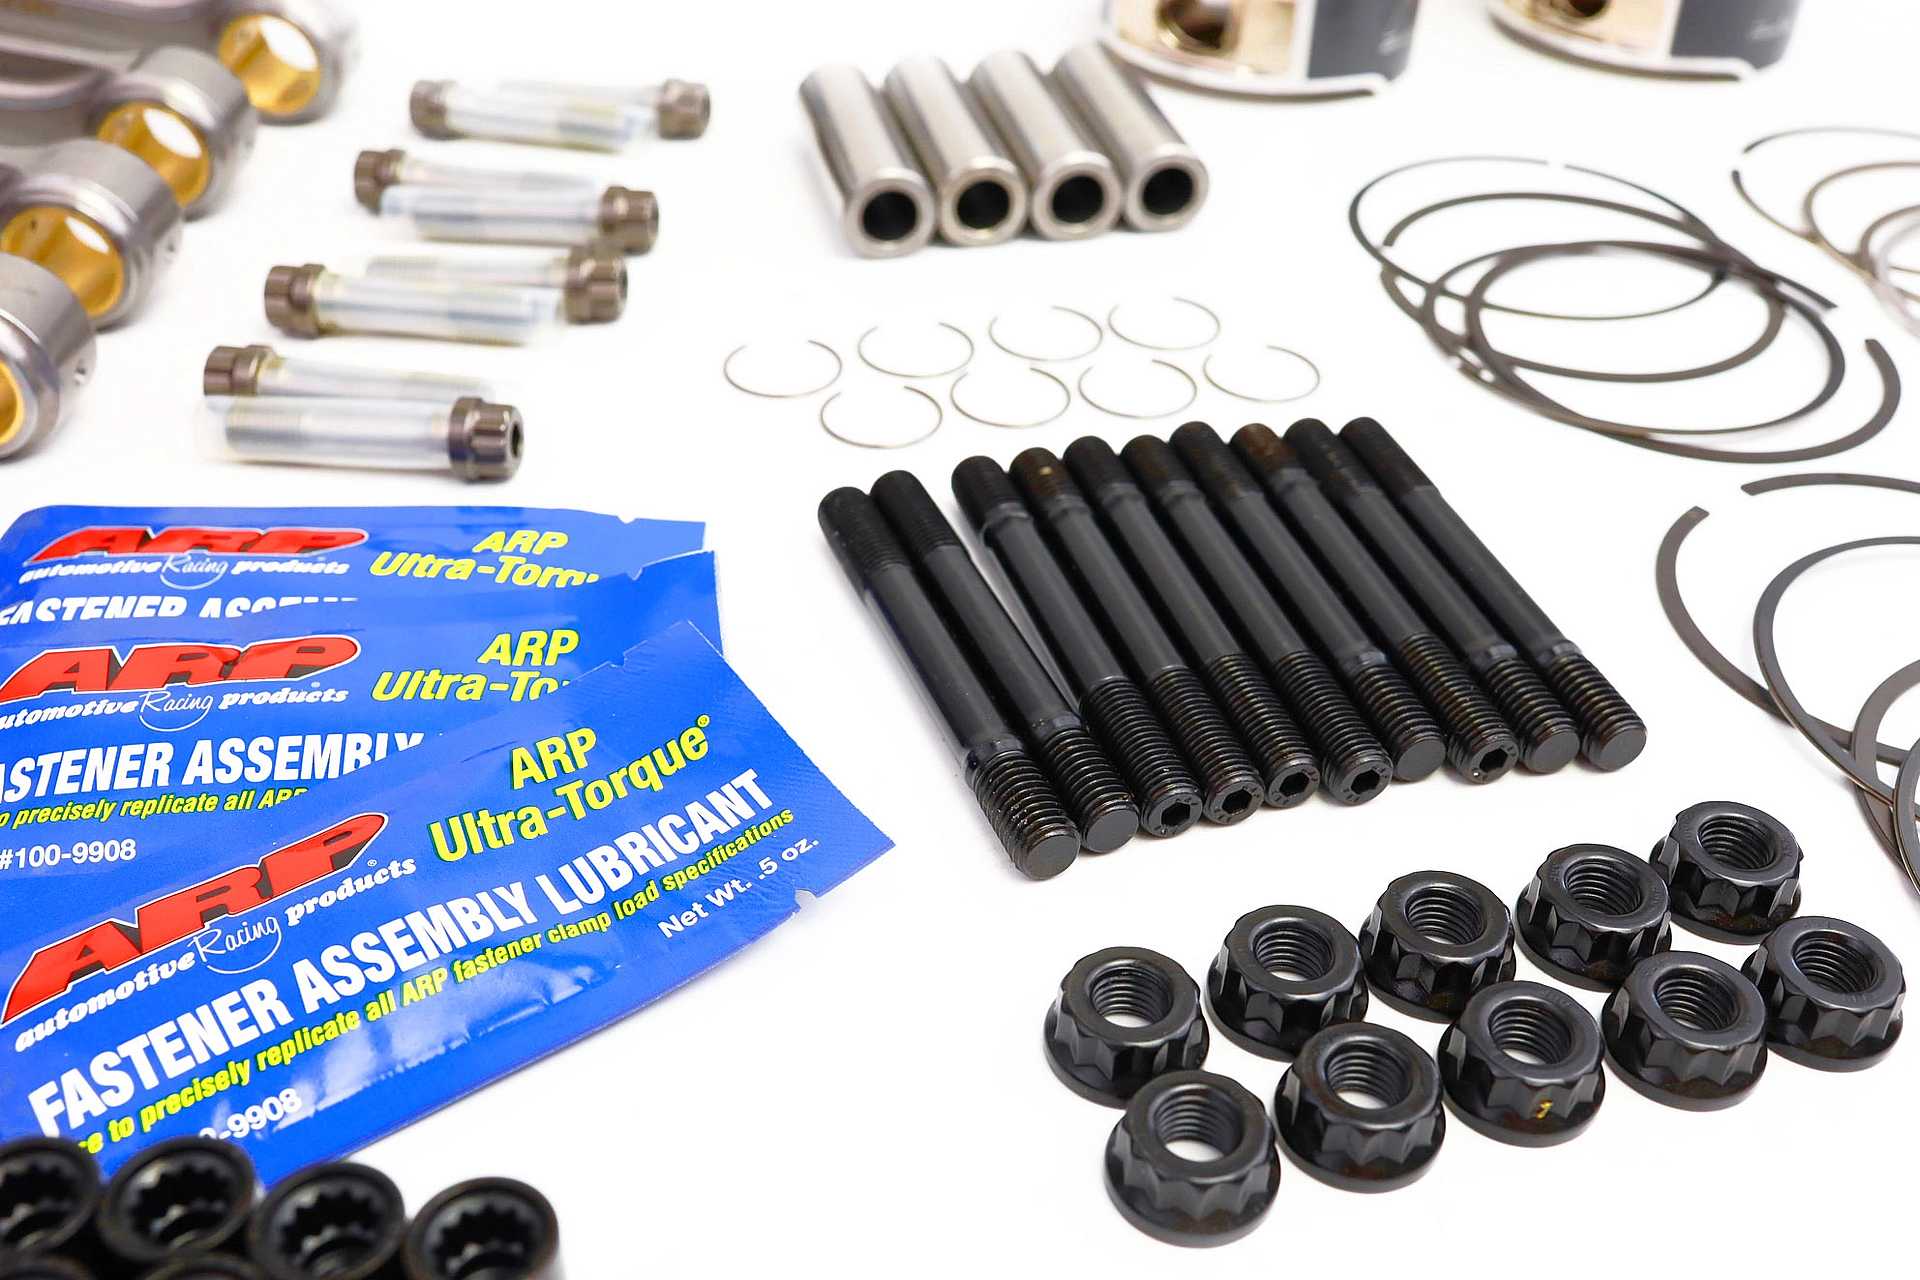 1.8T 20V Forged Piston & Steel Connecting Rod High Boost ULTI Kit Wiseco & BAR-TEK®